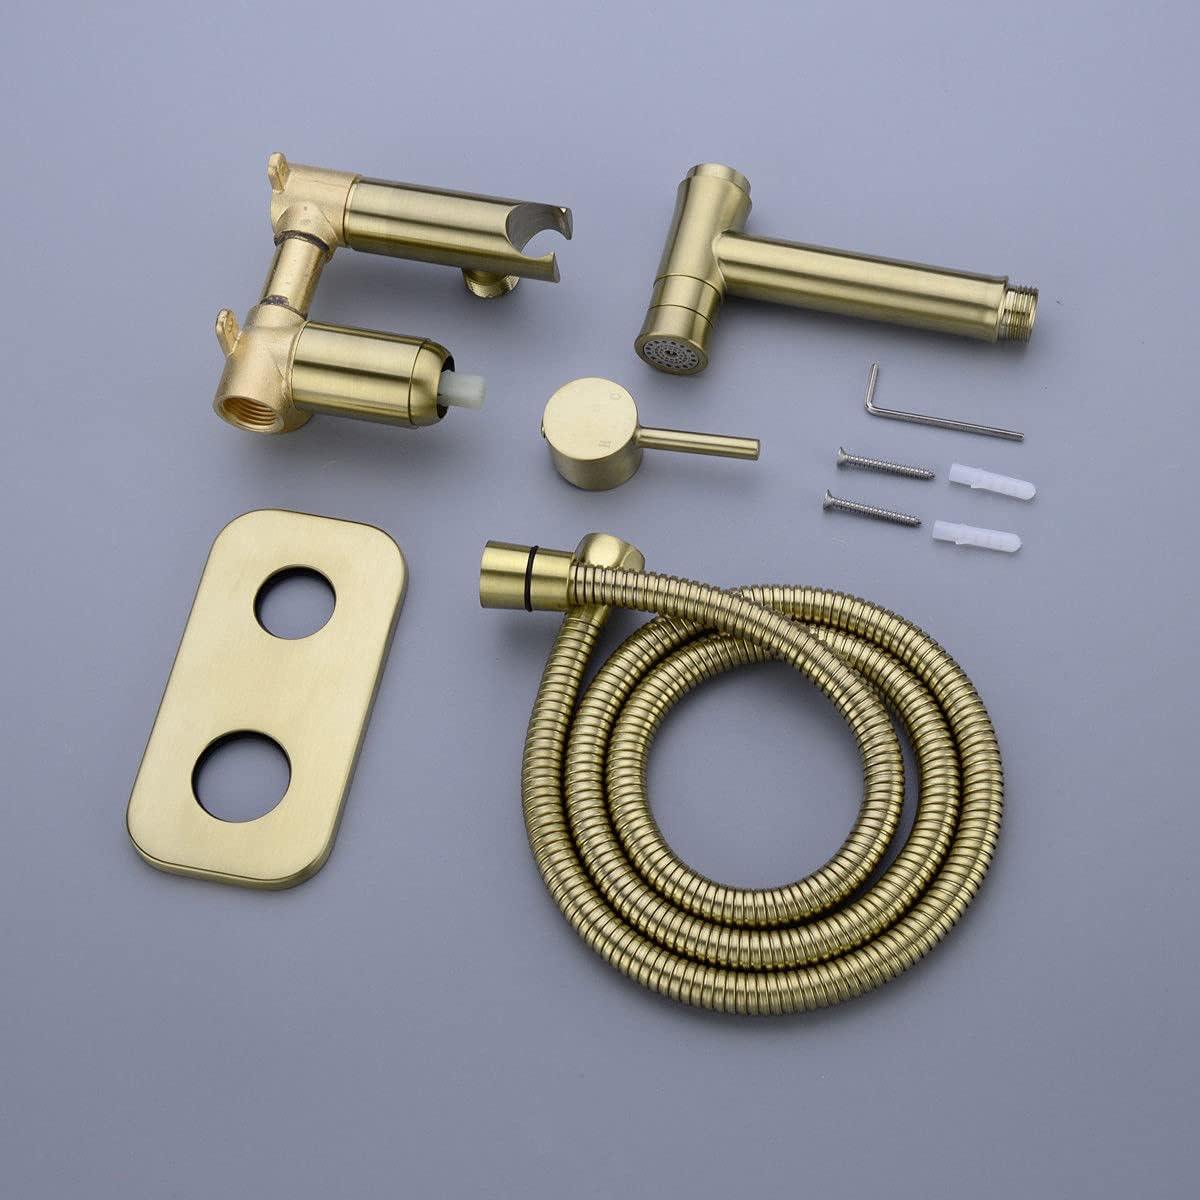 Bathroom Concealed Wall Mounted Hot and Cold Bidet Spray Set Shattaf Toilet Gold - Massive Discounts